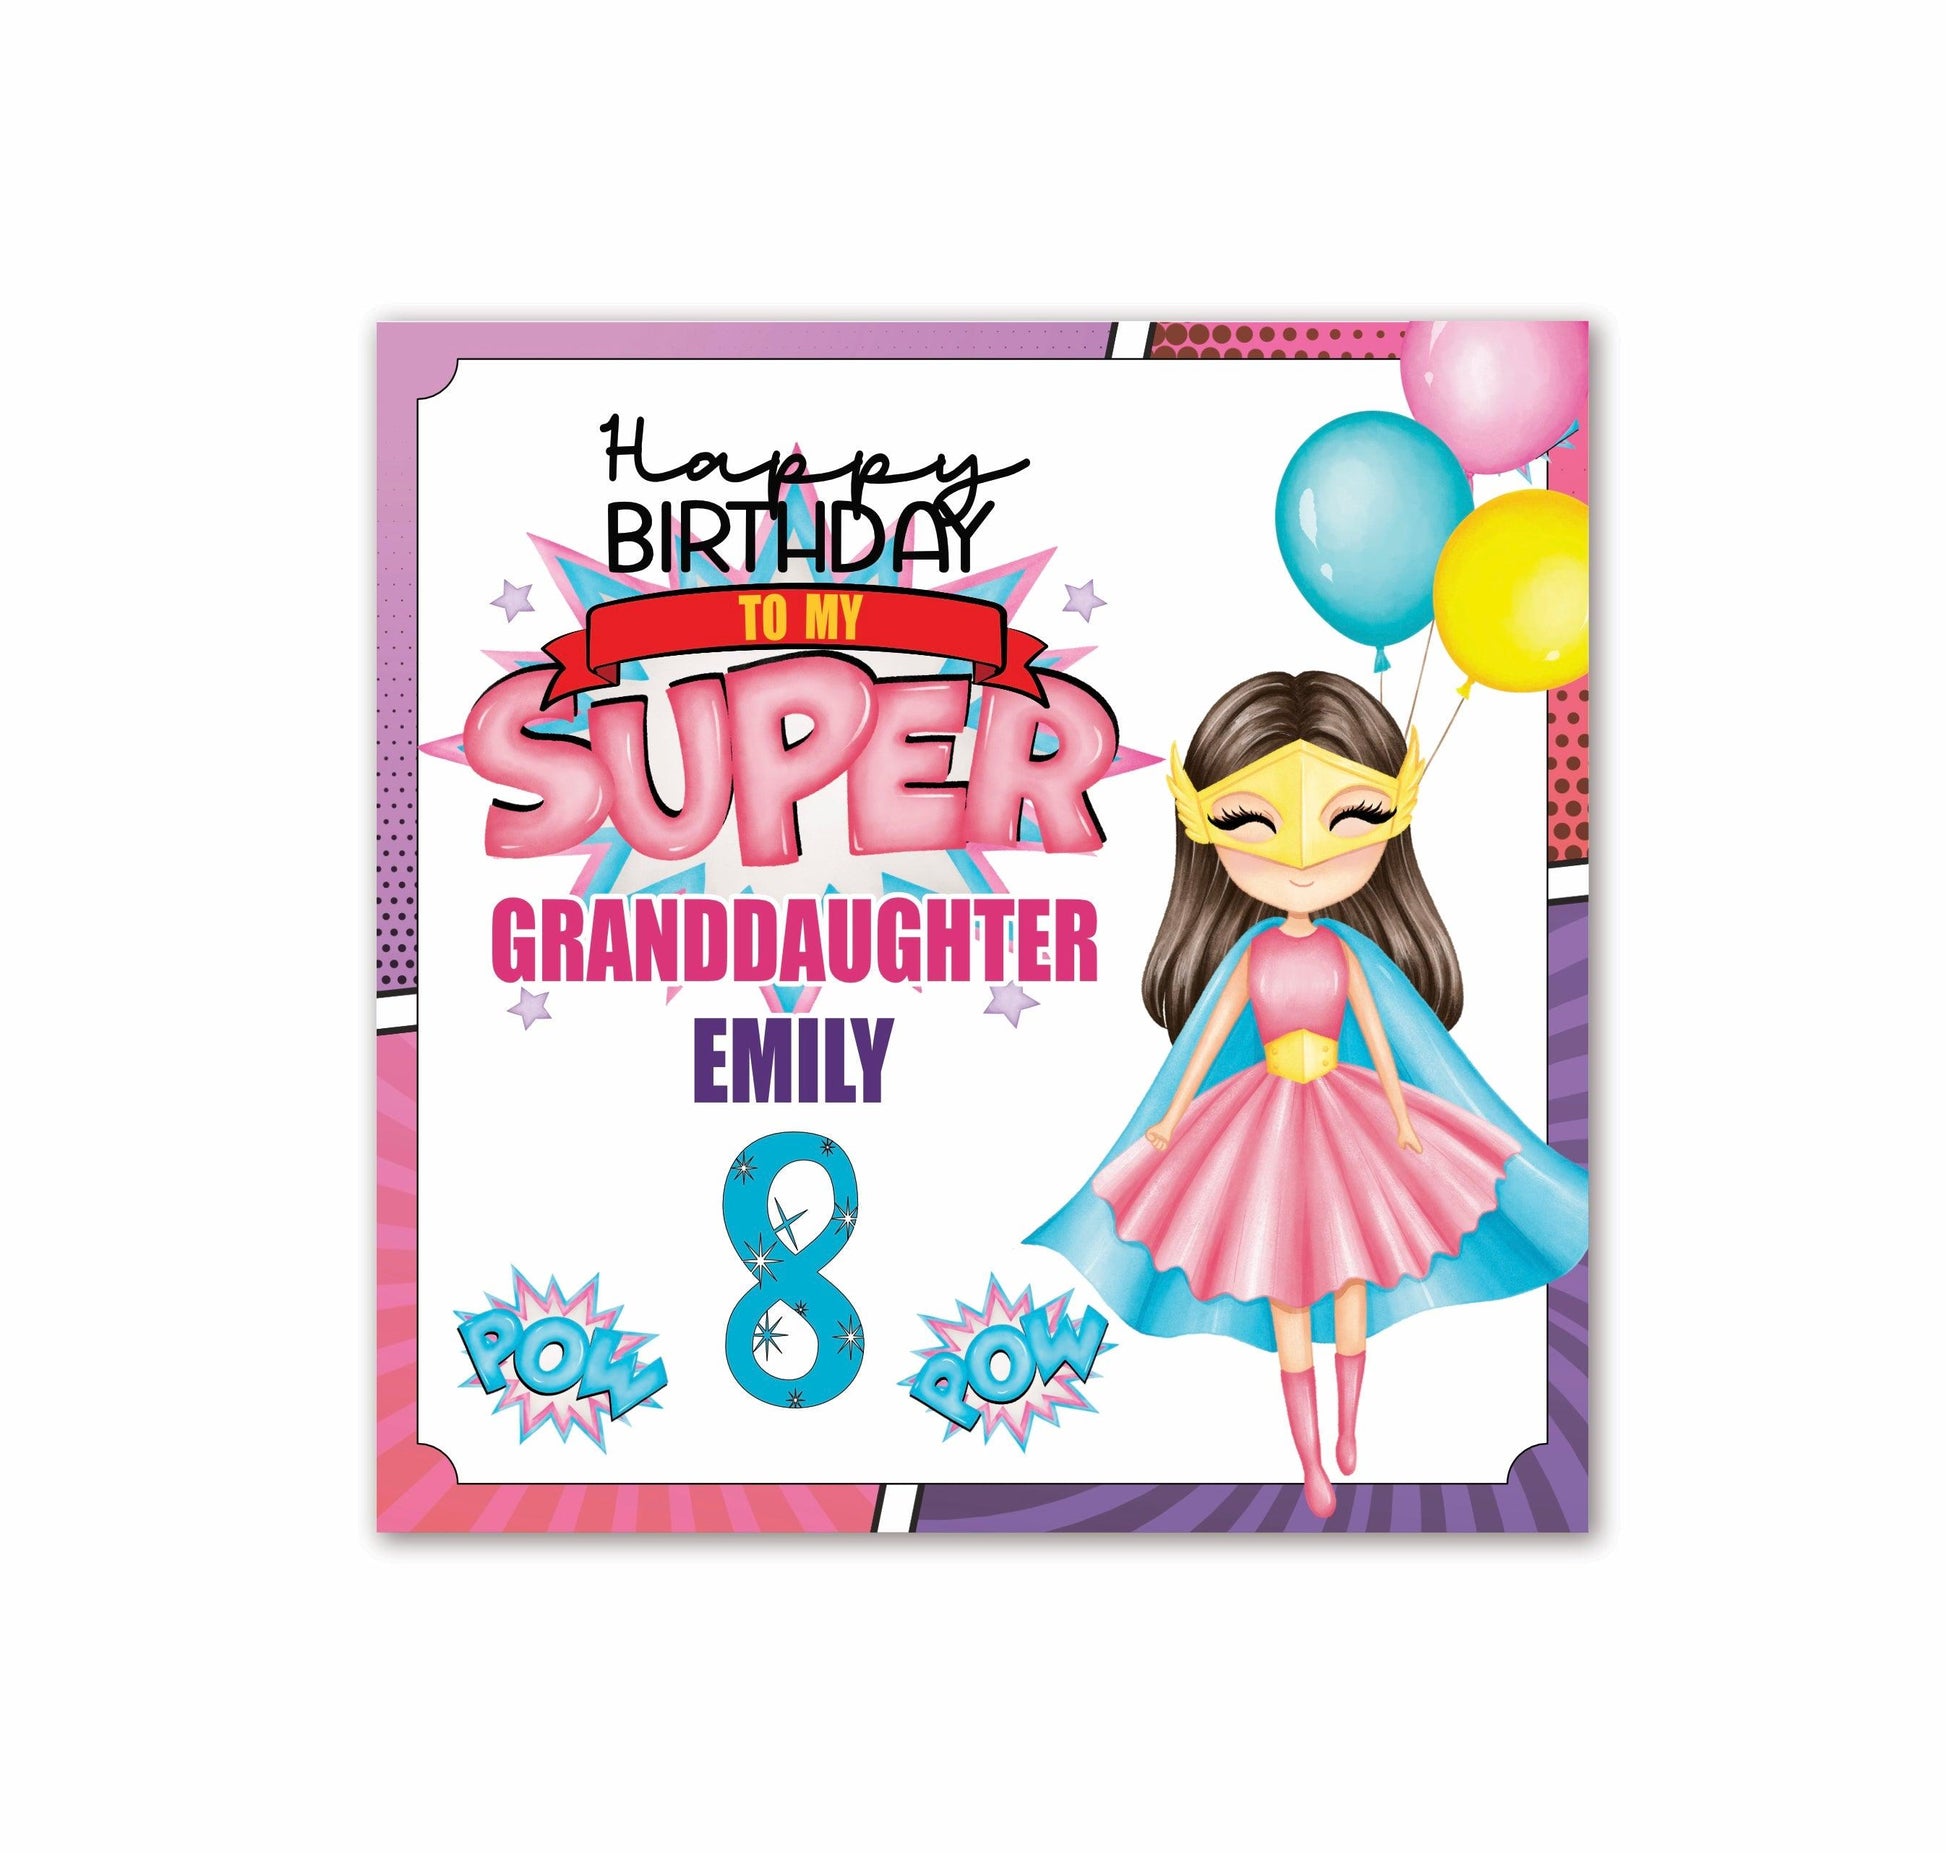 Super Hero Girls 8th Birthday Card for any Age (shown in Age 8) and any Relation (shown as Granddaughter) BROWN HAIR | Happy Birthday TO MY SUPER GRANDDAUGHTER [Name] | Oliver Rose Designs